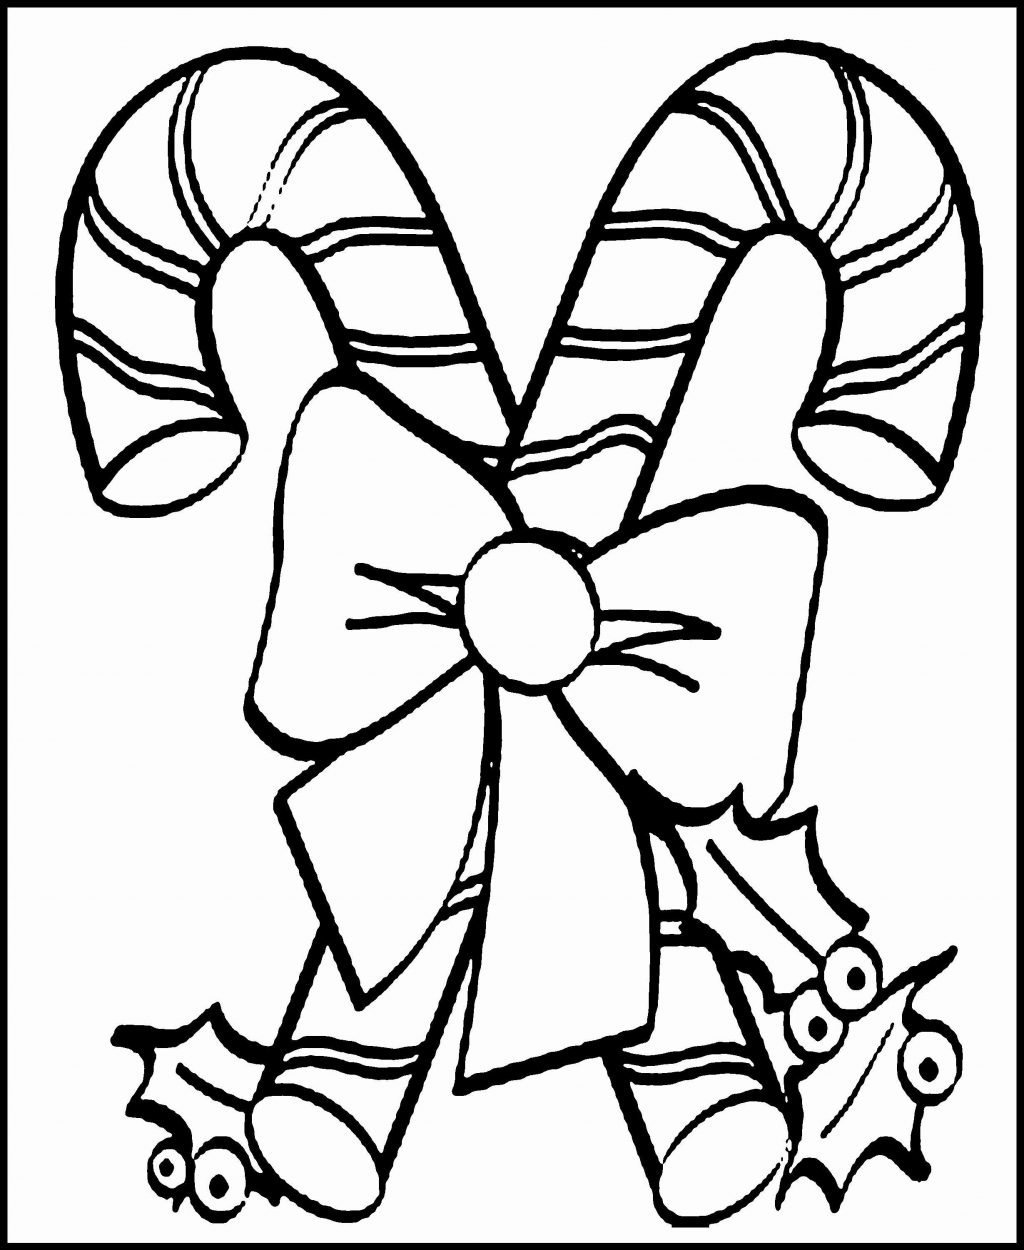 Christmas Color Pages For Kids Coloring Page Christmas Coloring Pages For Older Kids With Elderly